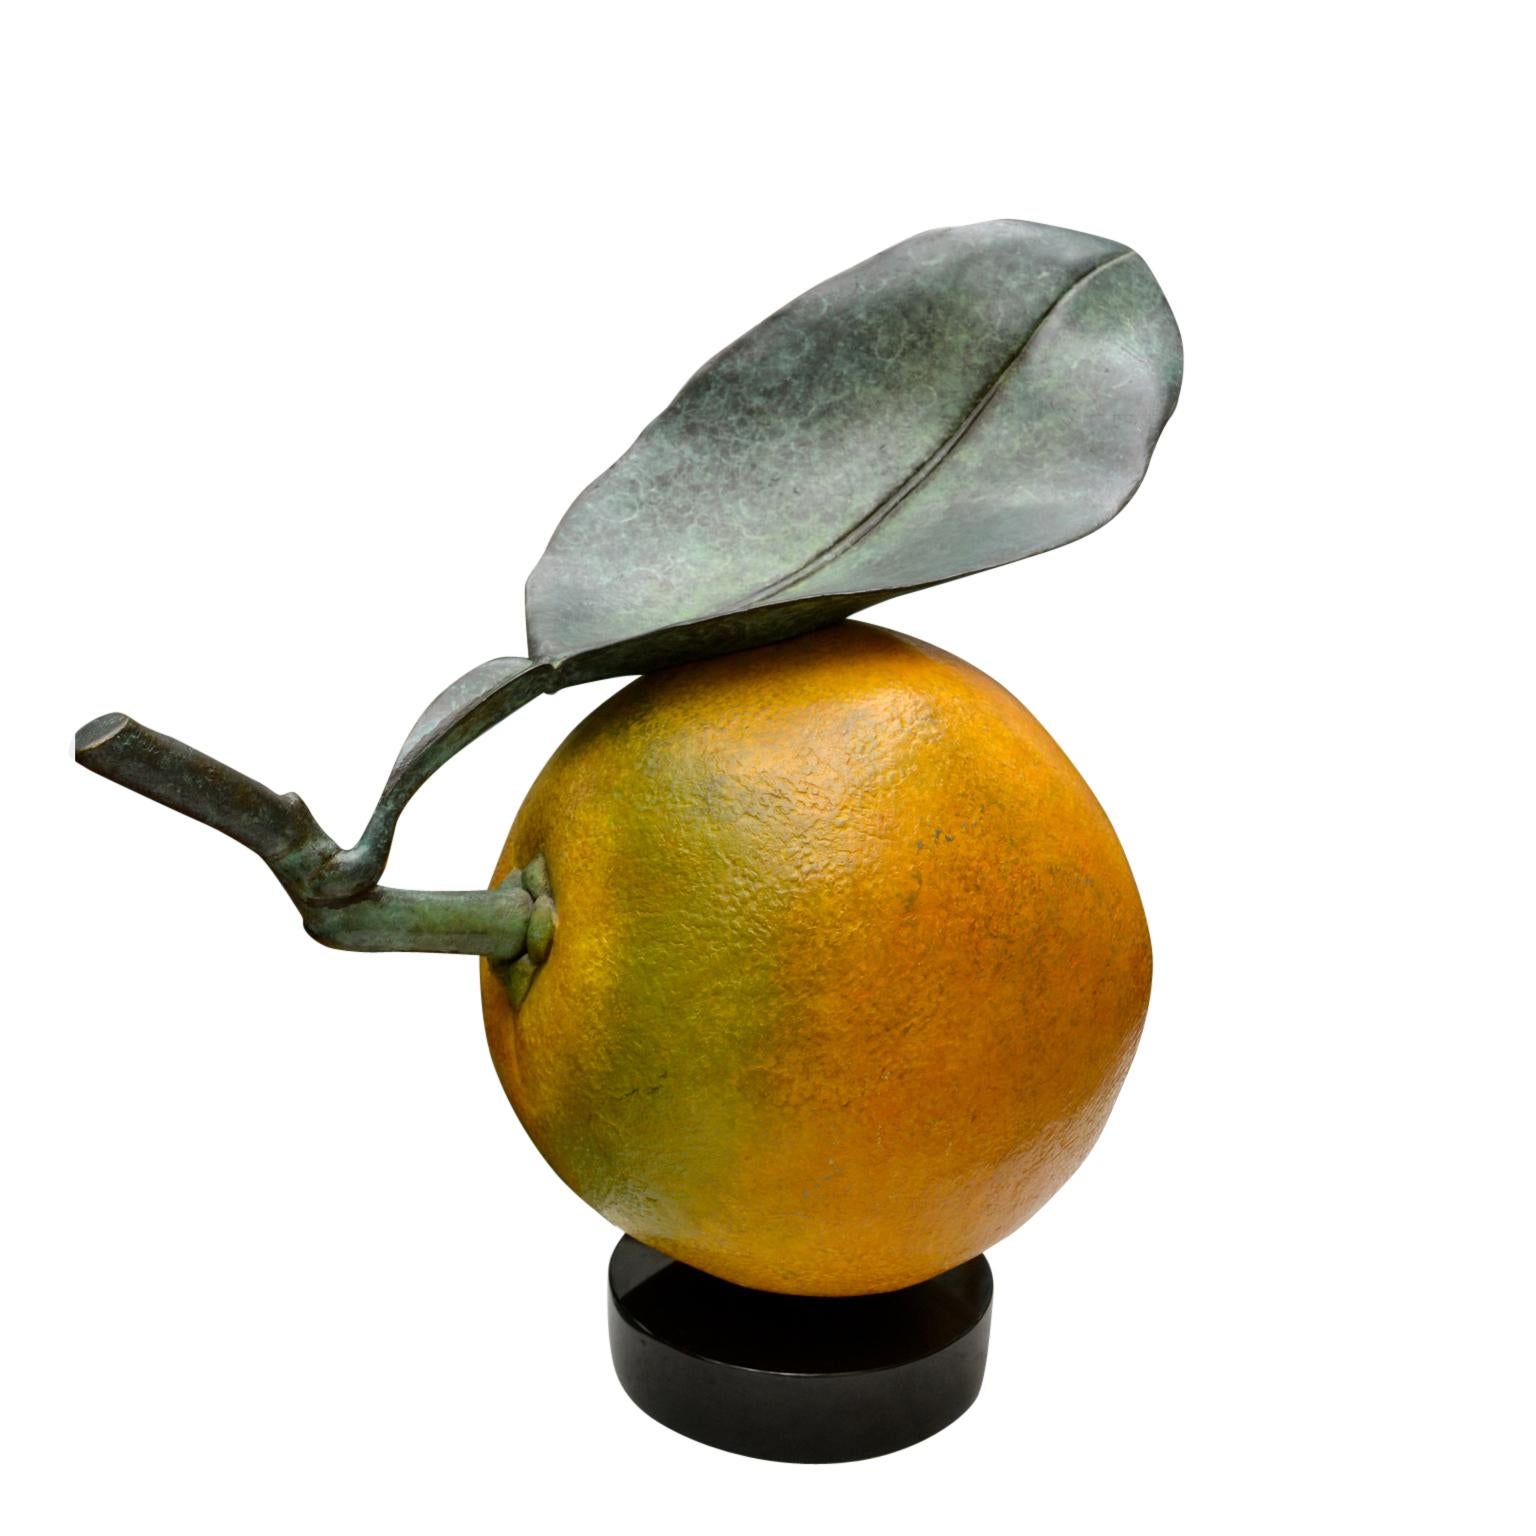 An extremely realistic bronze navel orange by executed by a collaboration of two artists Luis Montoya from Spain and Leslie Ortiz from America. The3 dou work under the pseudonym of Popliteo.

Luis Montoya and Leslie Ortiz have been working